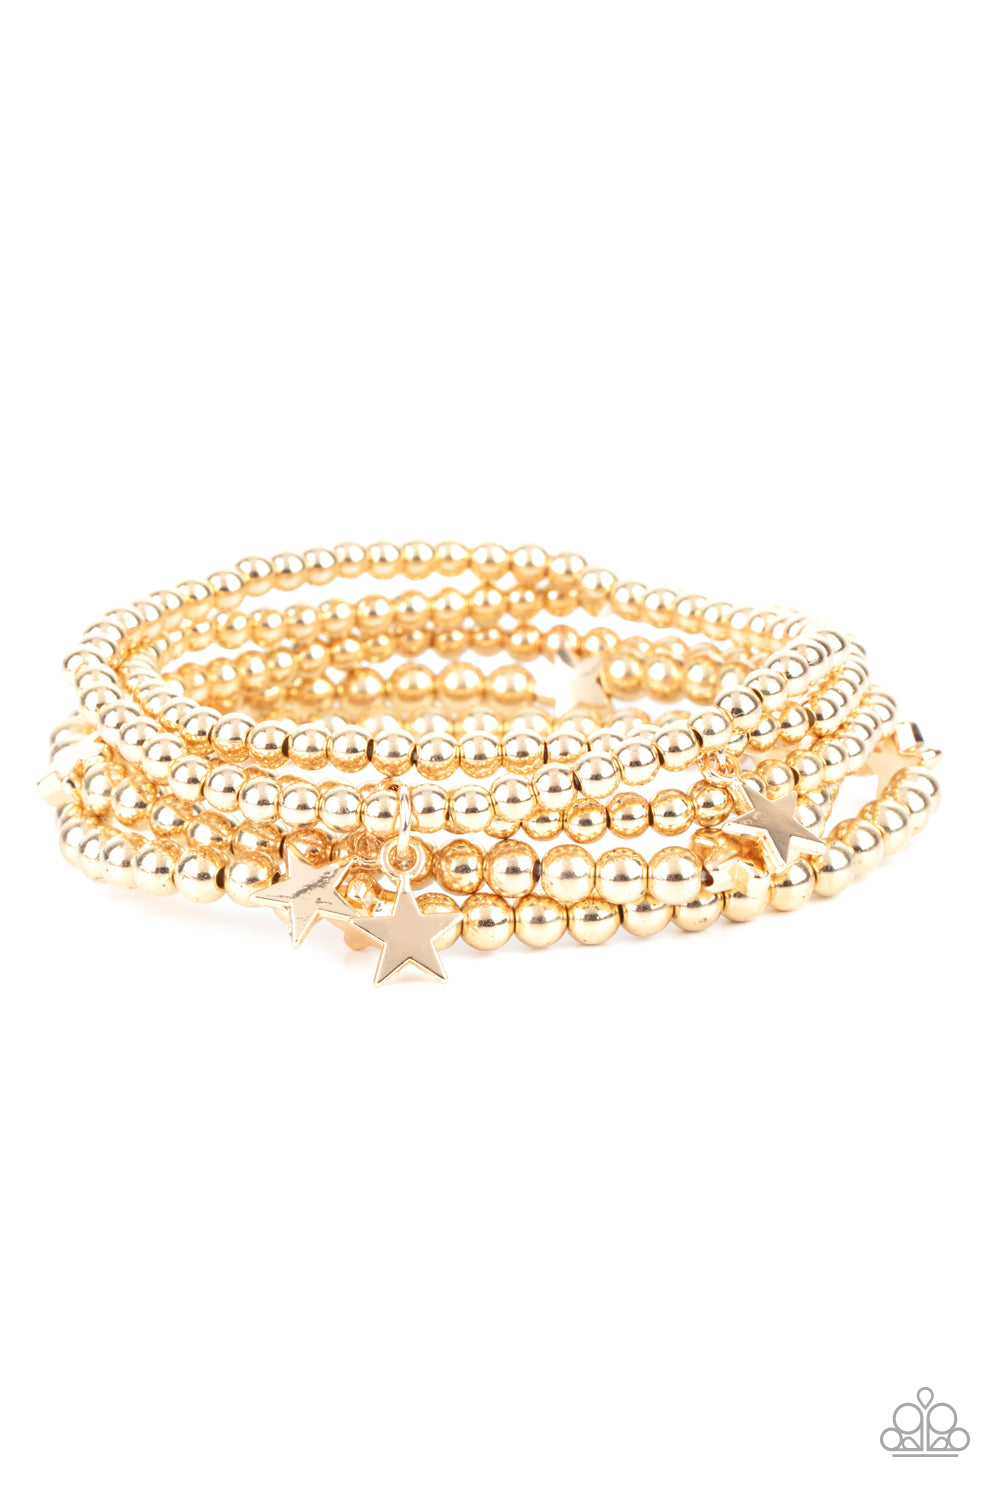 Paparazzi American All-Star - Gold Bracelet - A Finishing Touch Jewelry